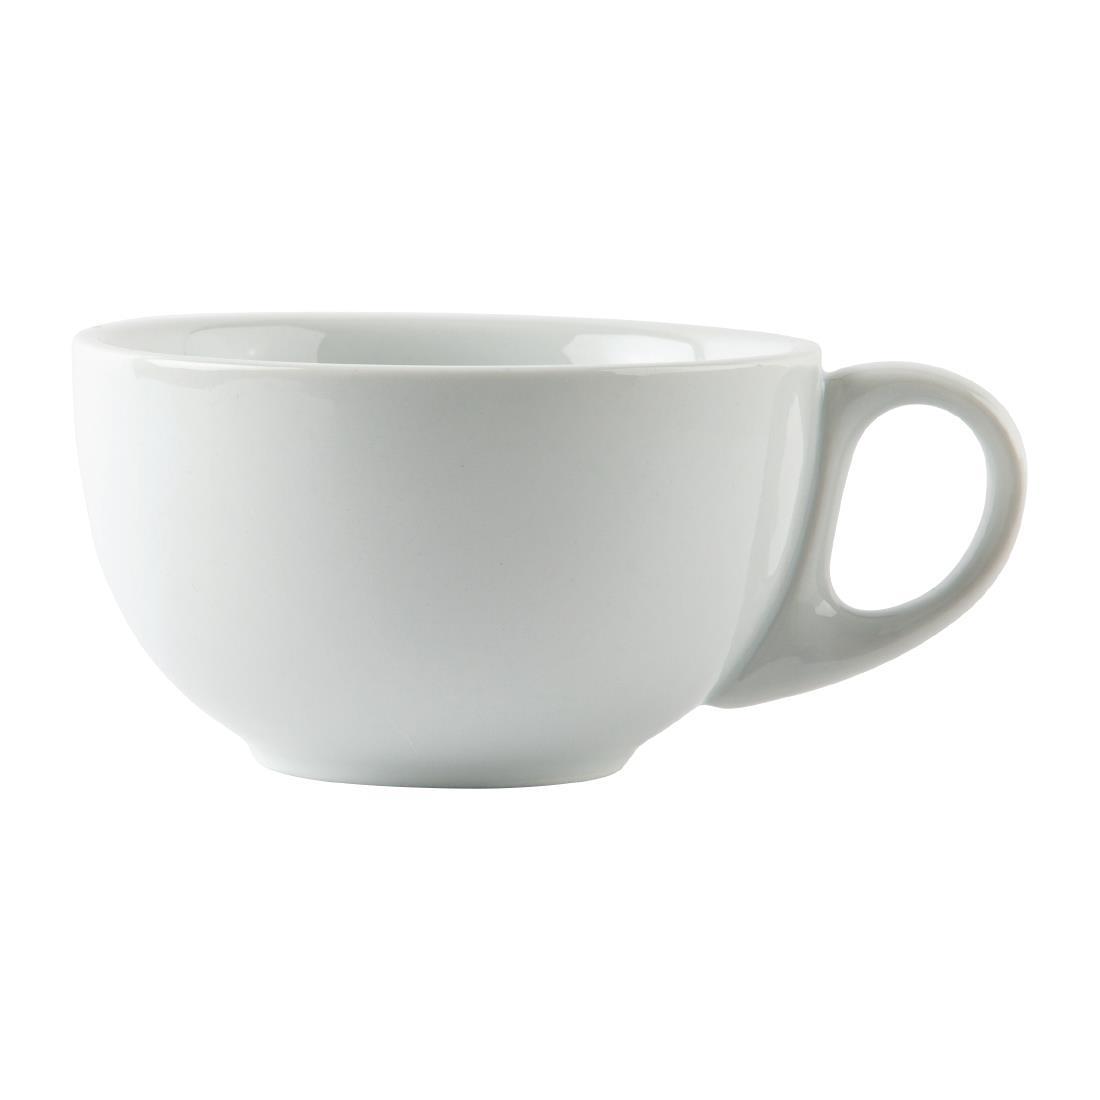 Olympia Athena Cappuccino Cups 285ml (Pack of 12) - GG870  - 4